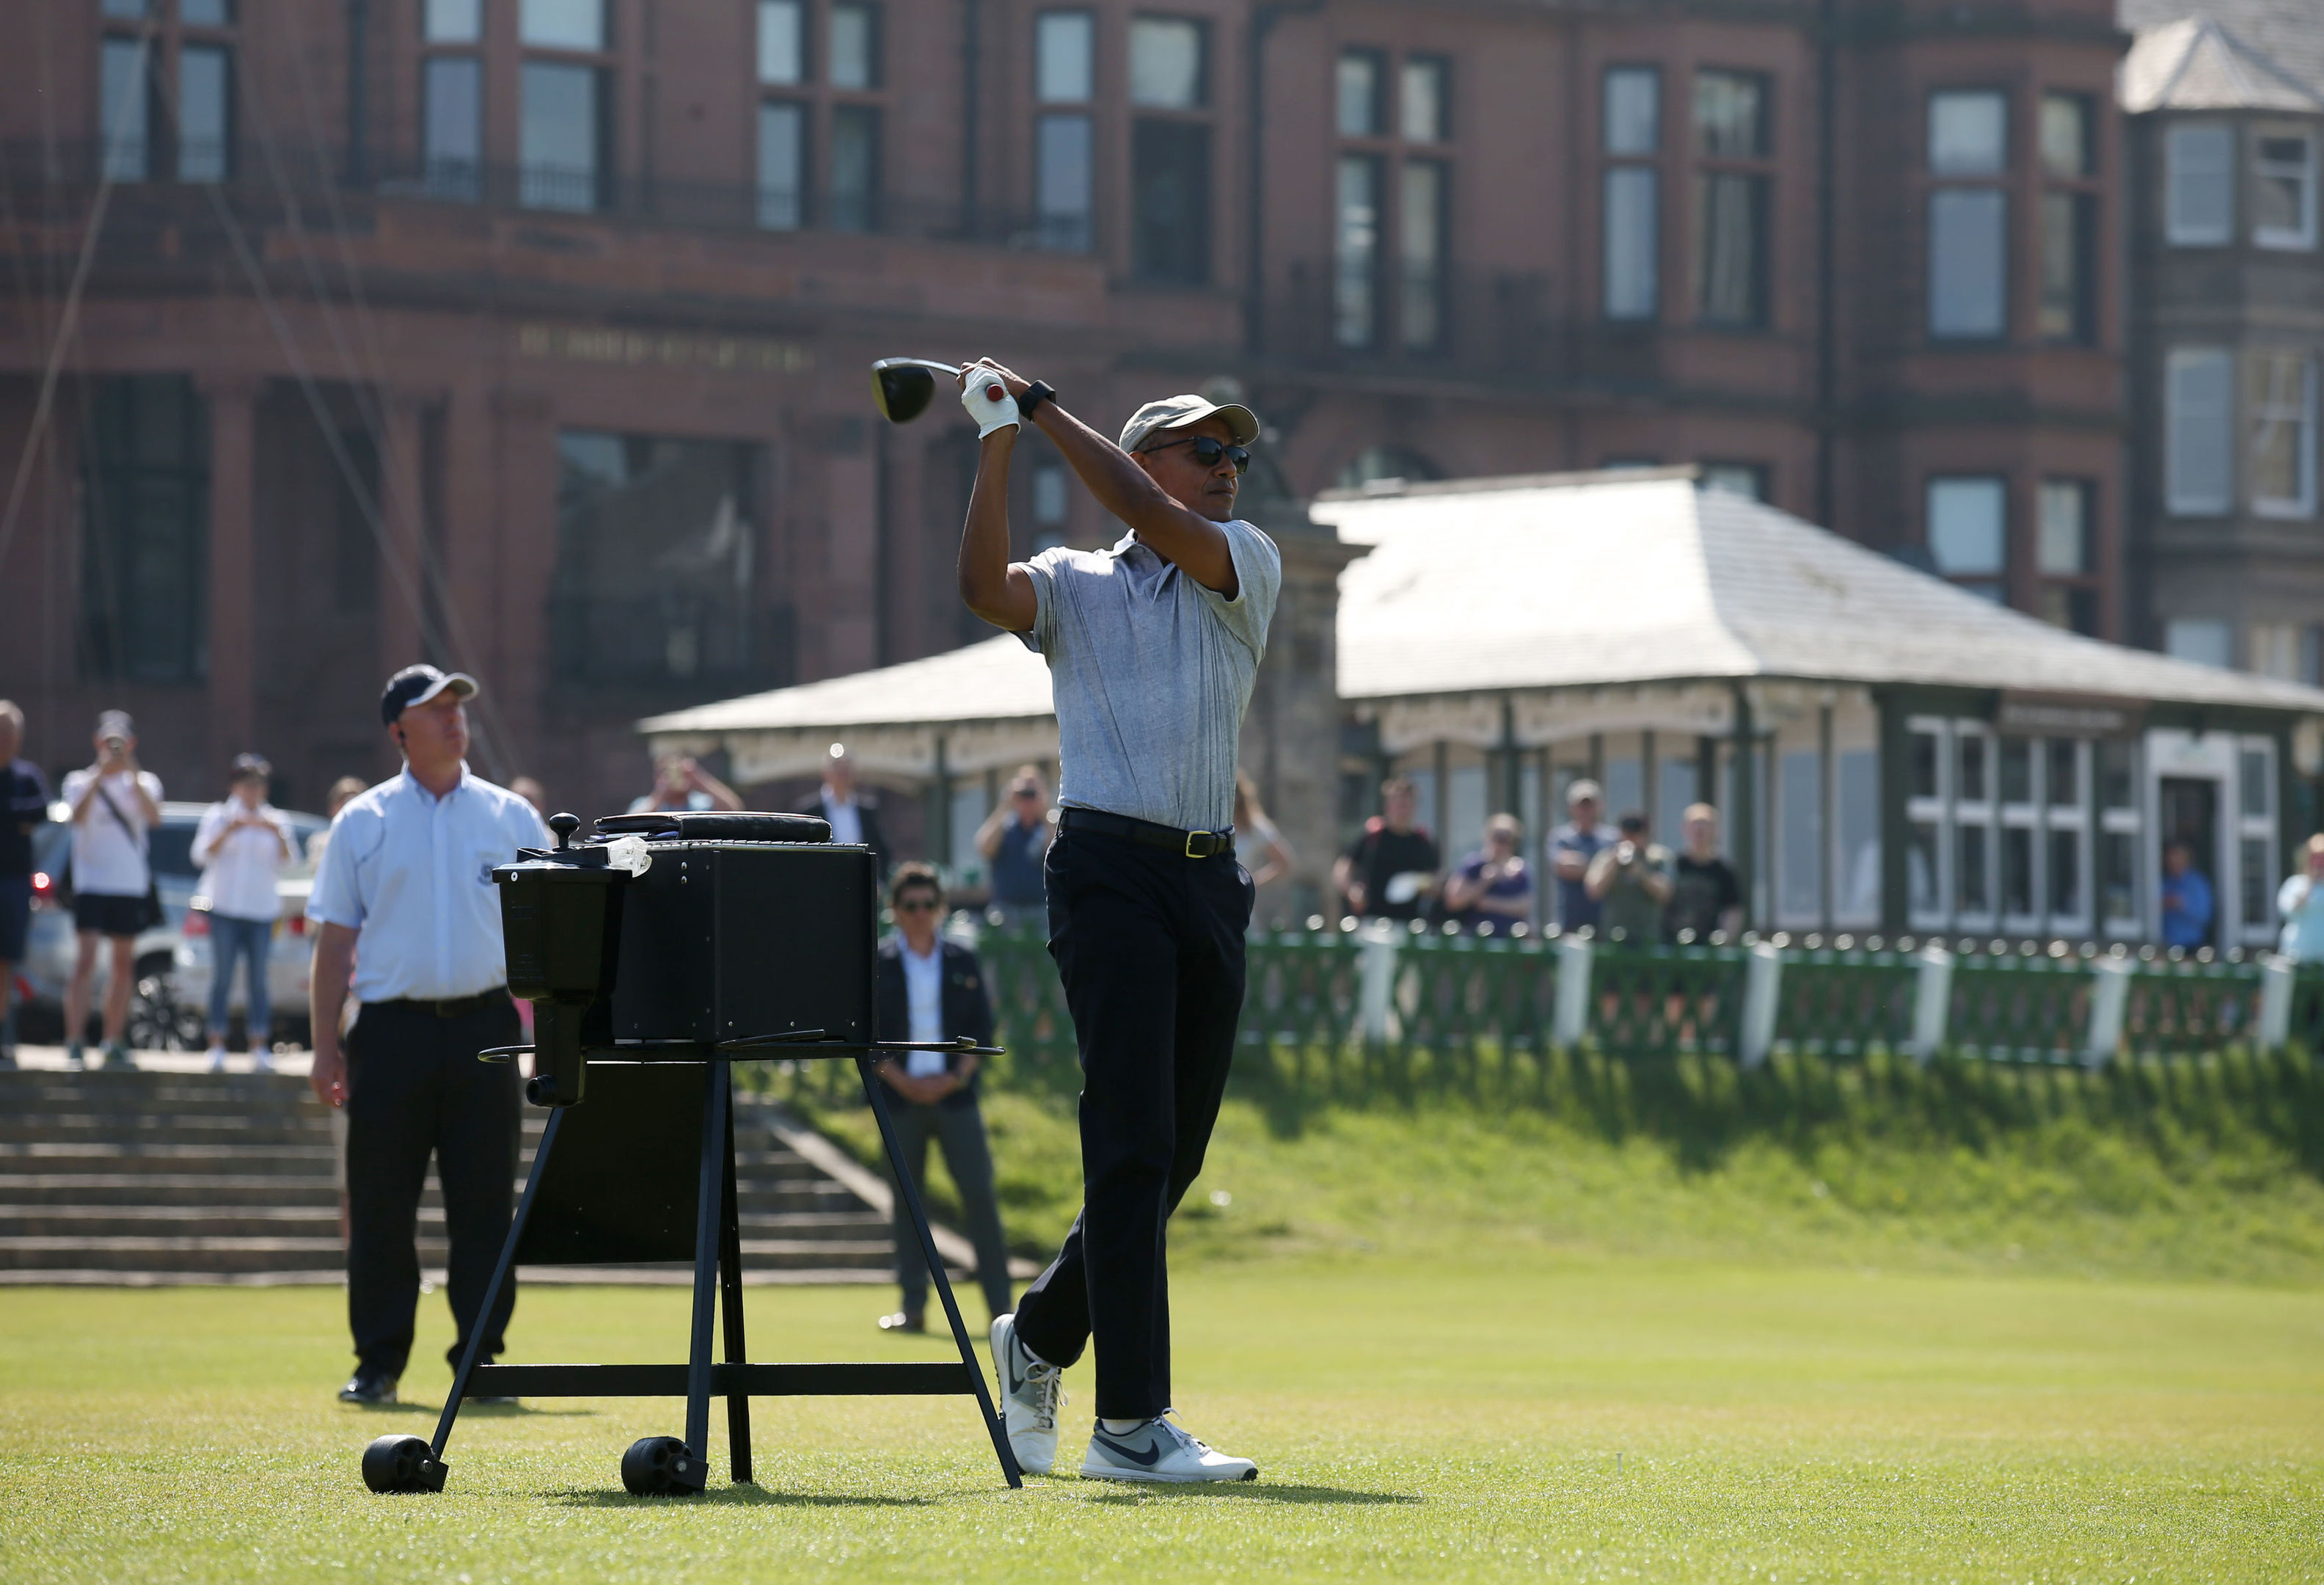 Former US president Barack Obama tees off at the first hole at St Andrews.